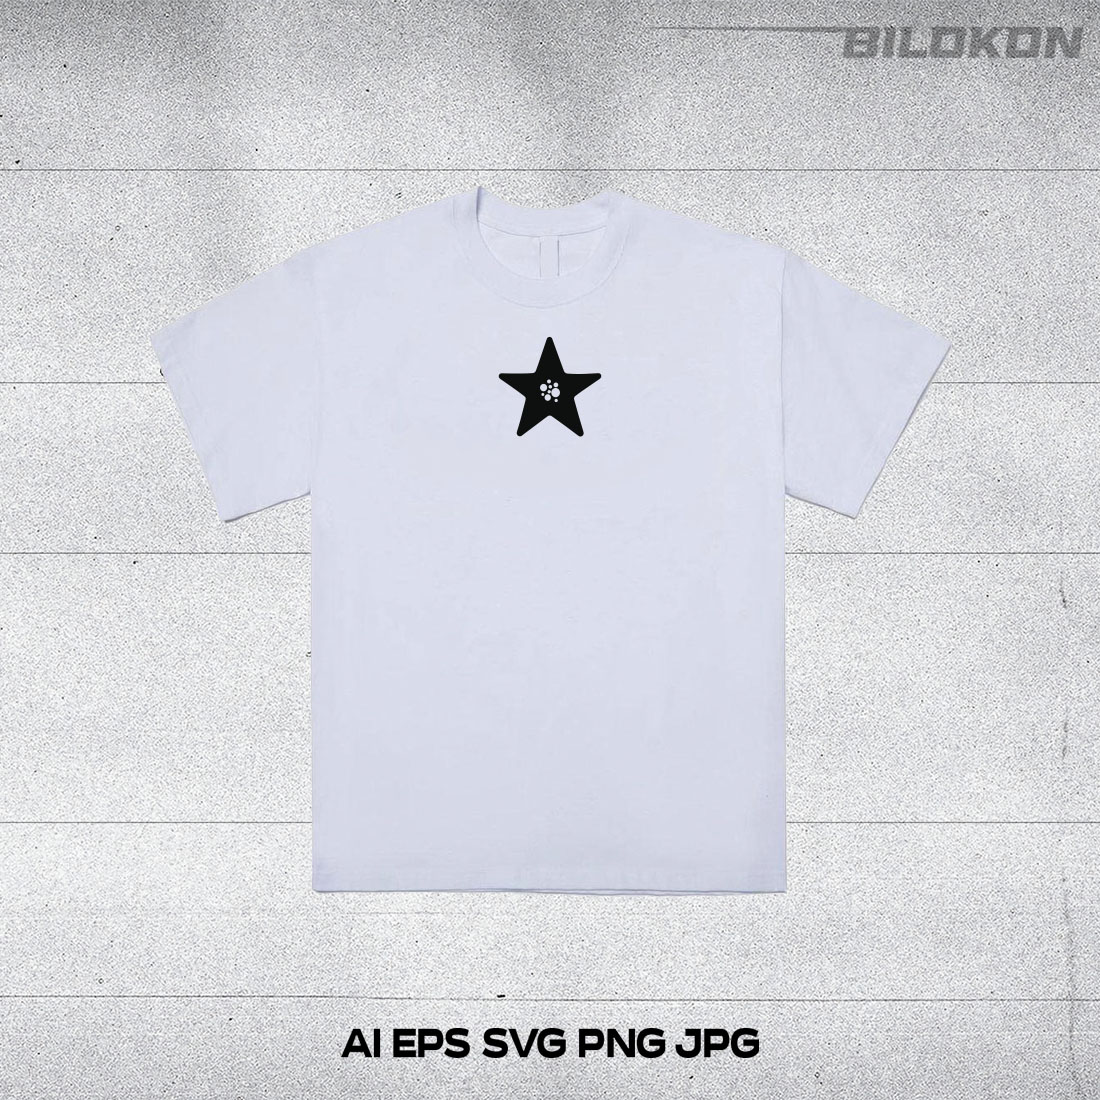 White t - shirt with a black star on it.